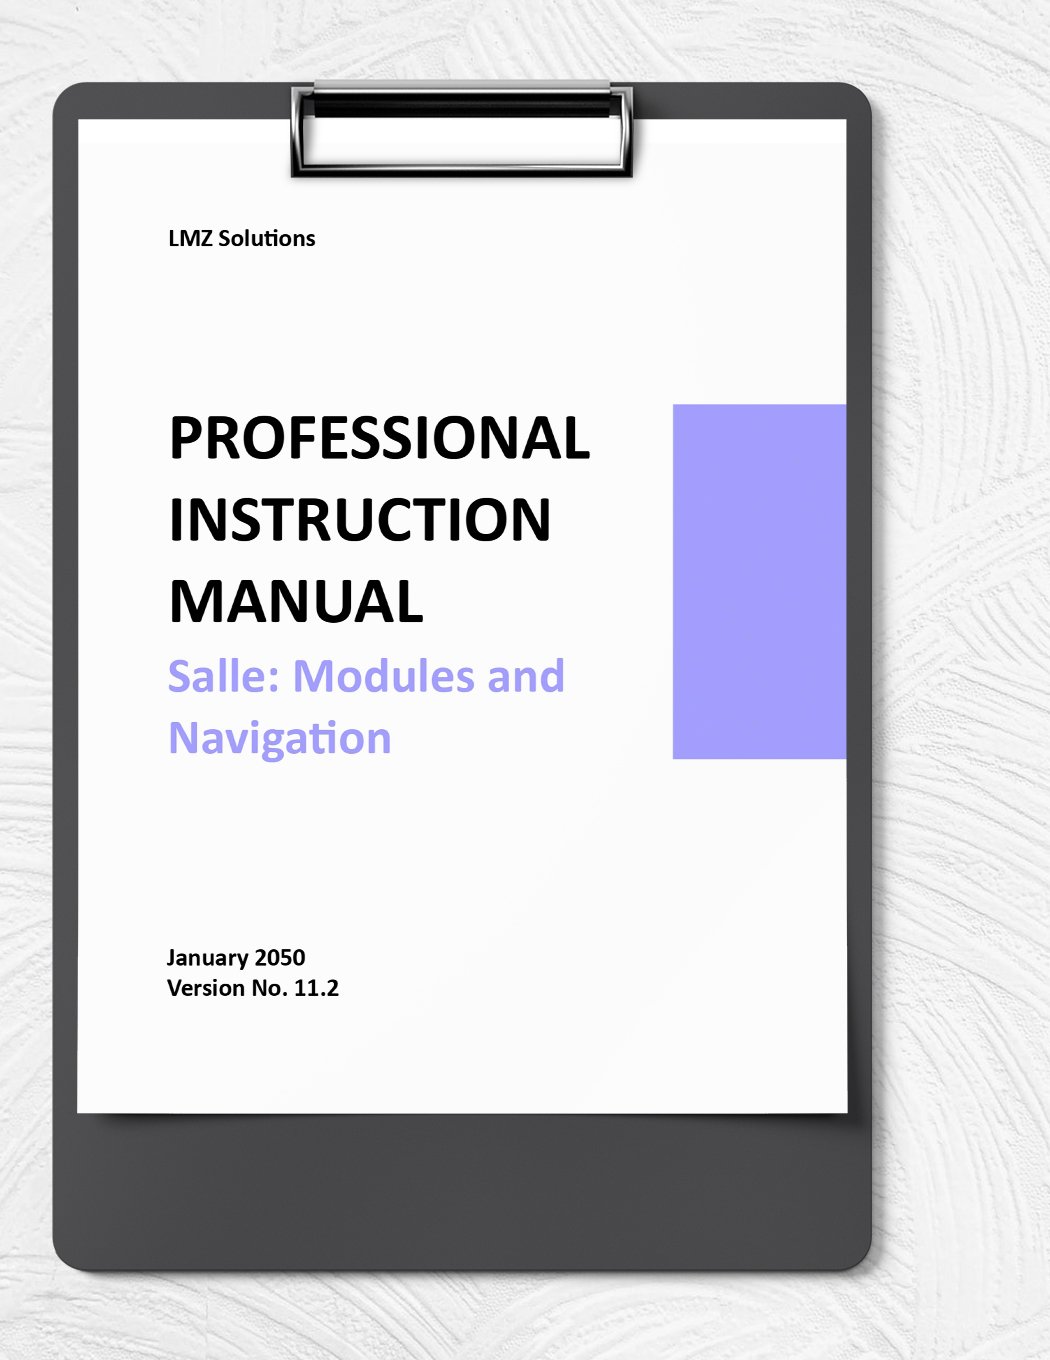 Professional Instruction Manual Template